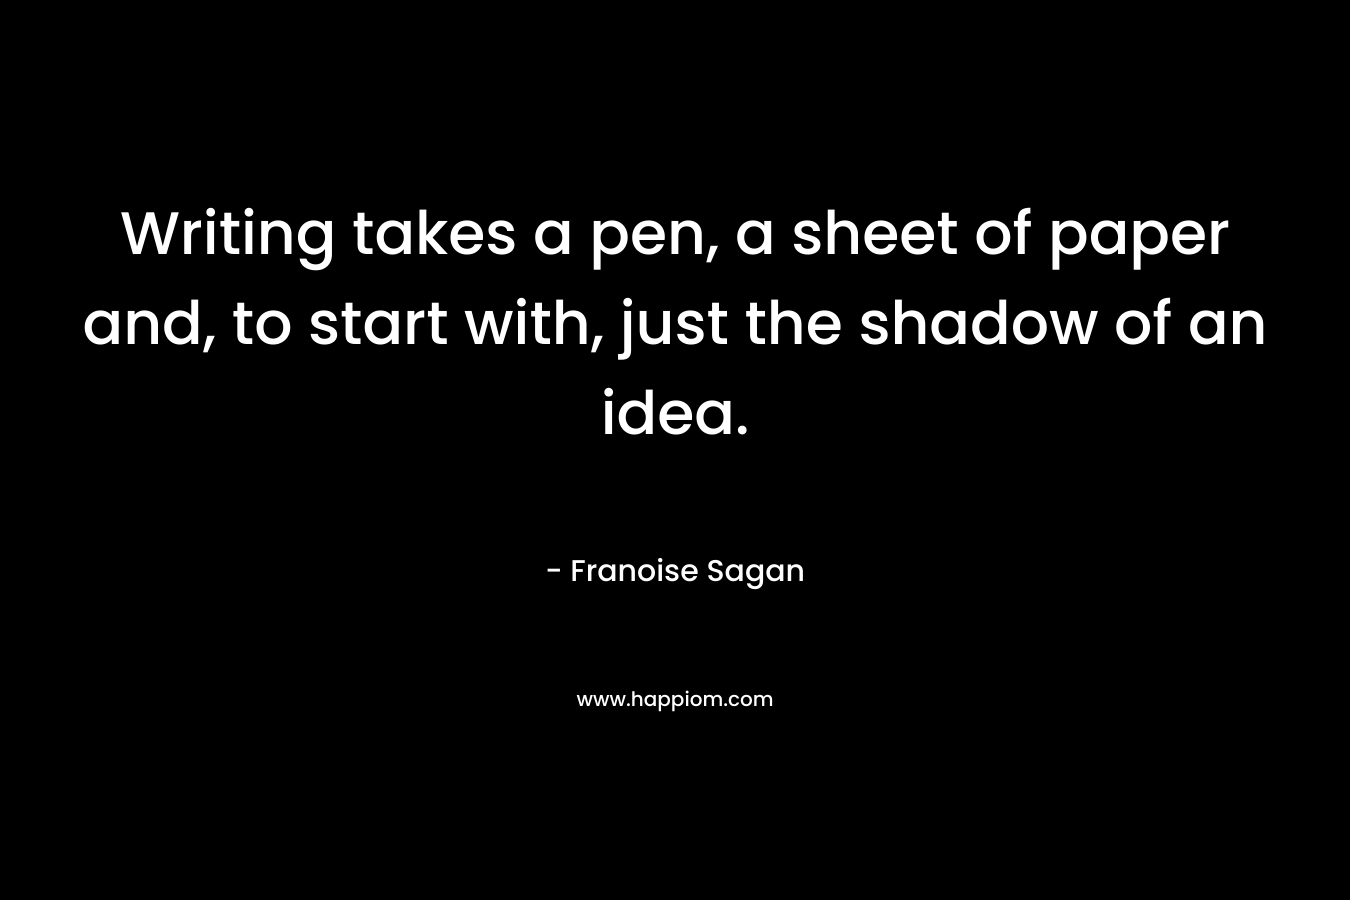 Writing takes a pen, a sheet of paper and, to start with, just the shadow of an idea. – Franoise Sagan